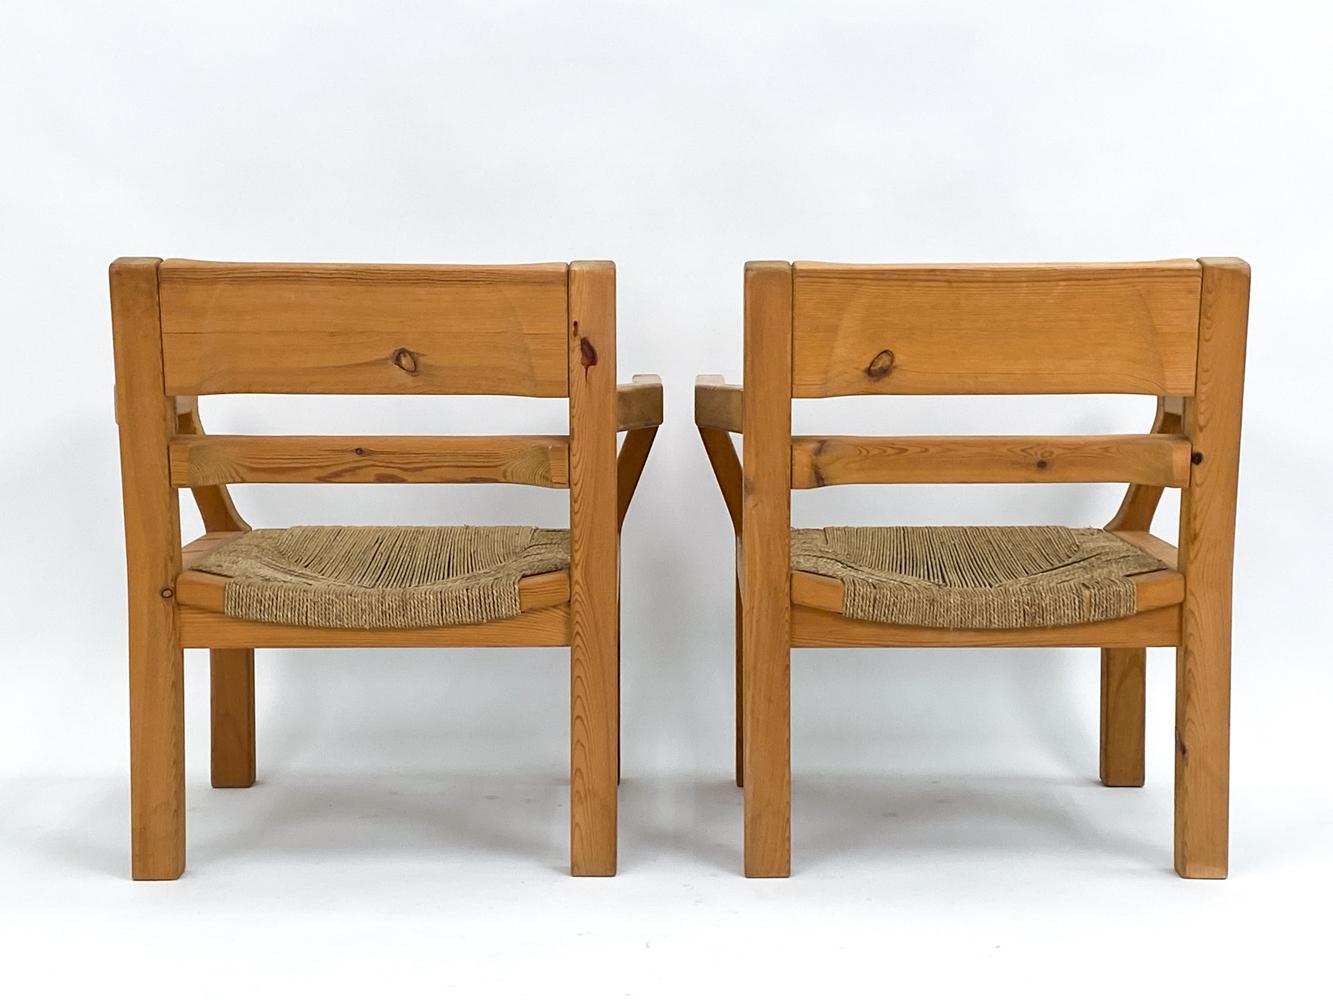 Pair of Tage Poulsen Pine & Rush Seat Lounge Chairs, c. 1970's For Sale 3